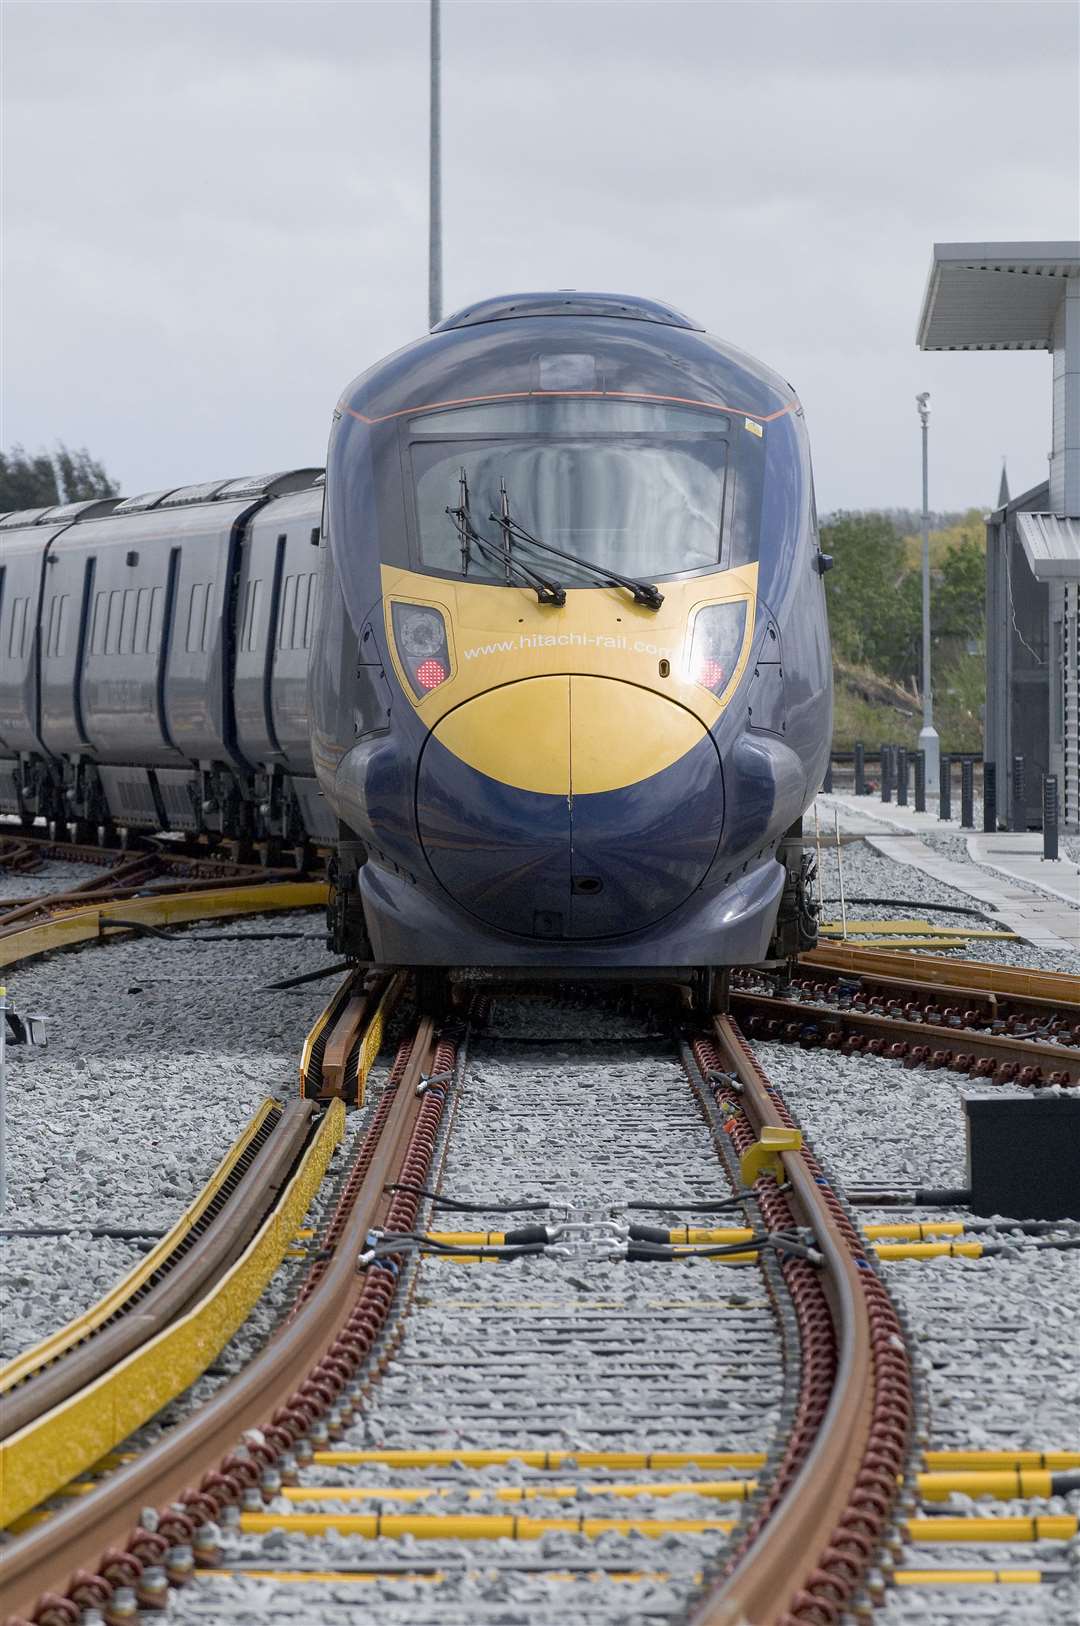 Most services in Kent will be visited once per hour under the new timetable